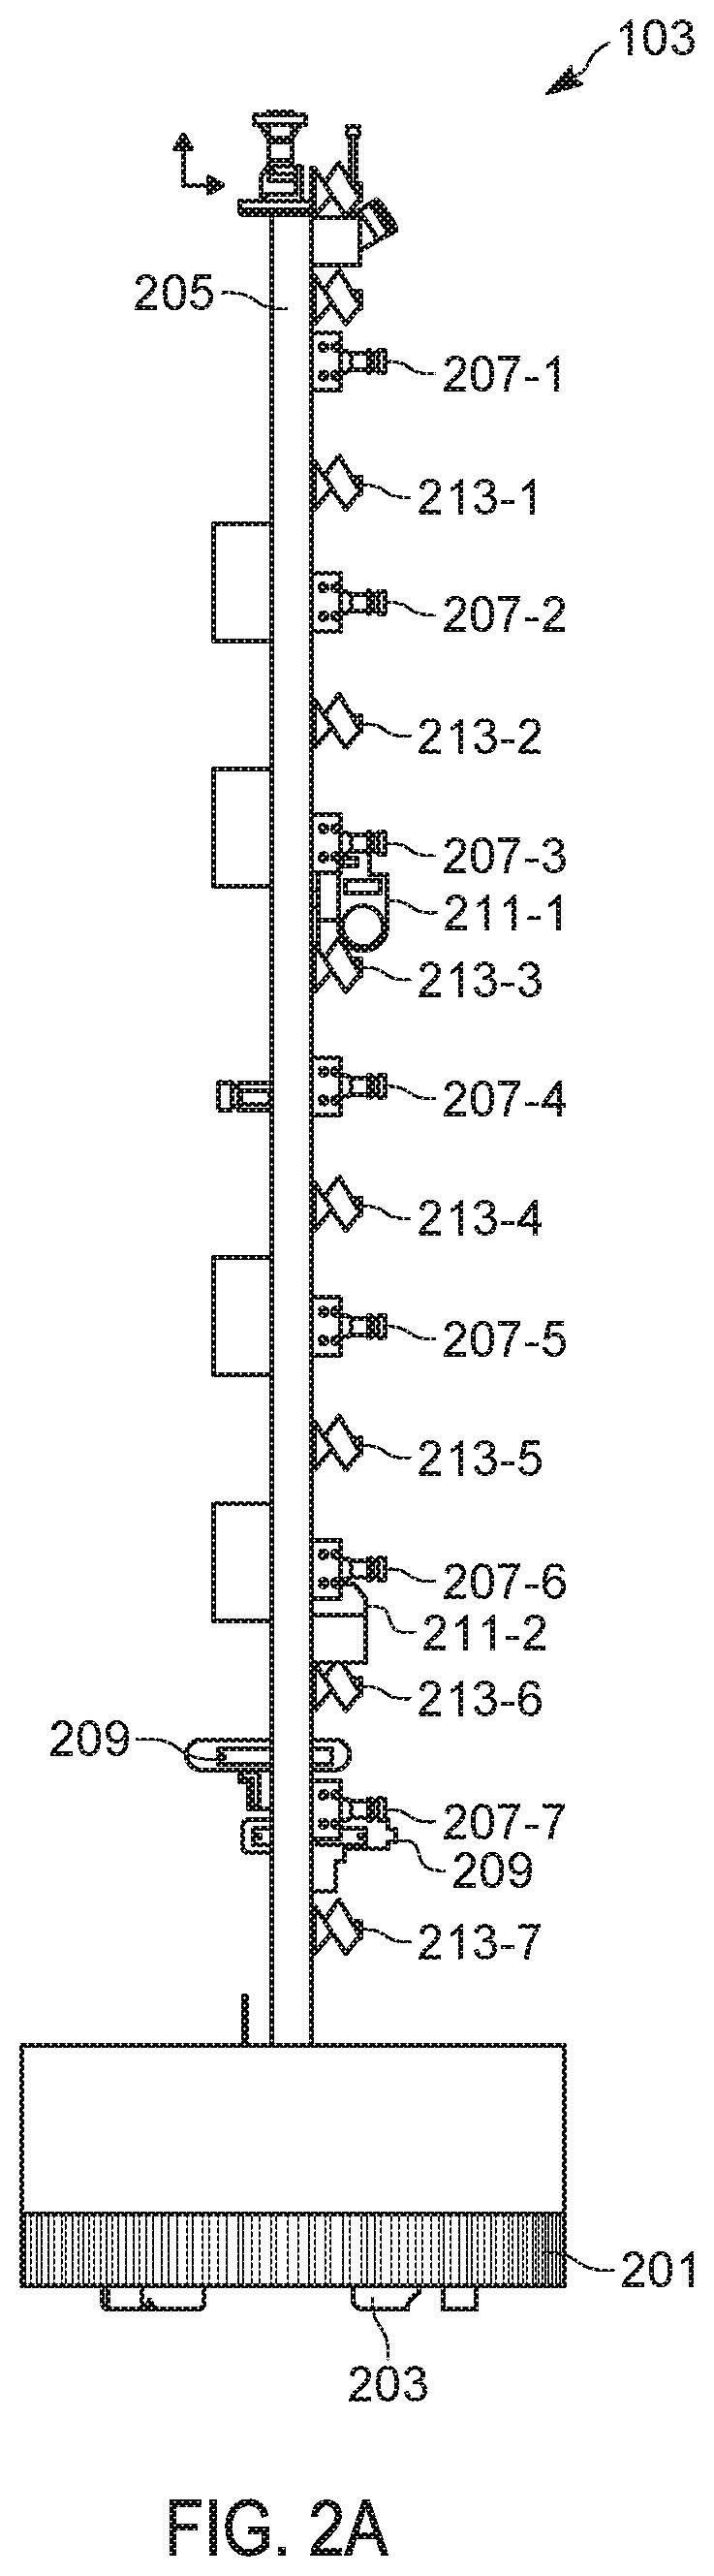 Method, system and apparatus for navigational assistance